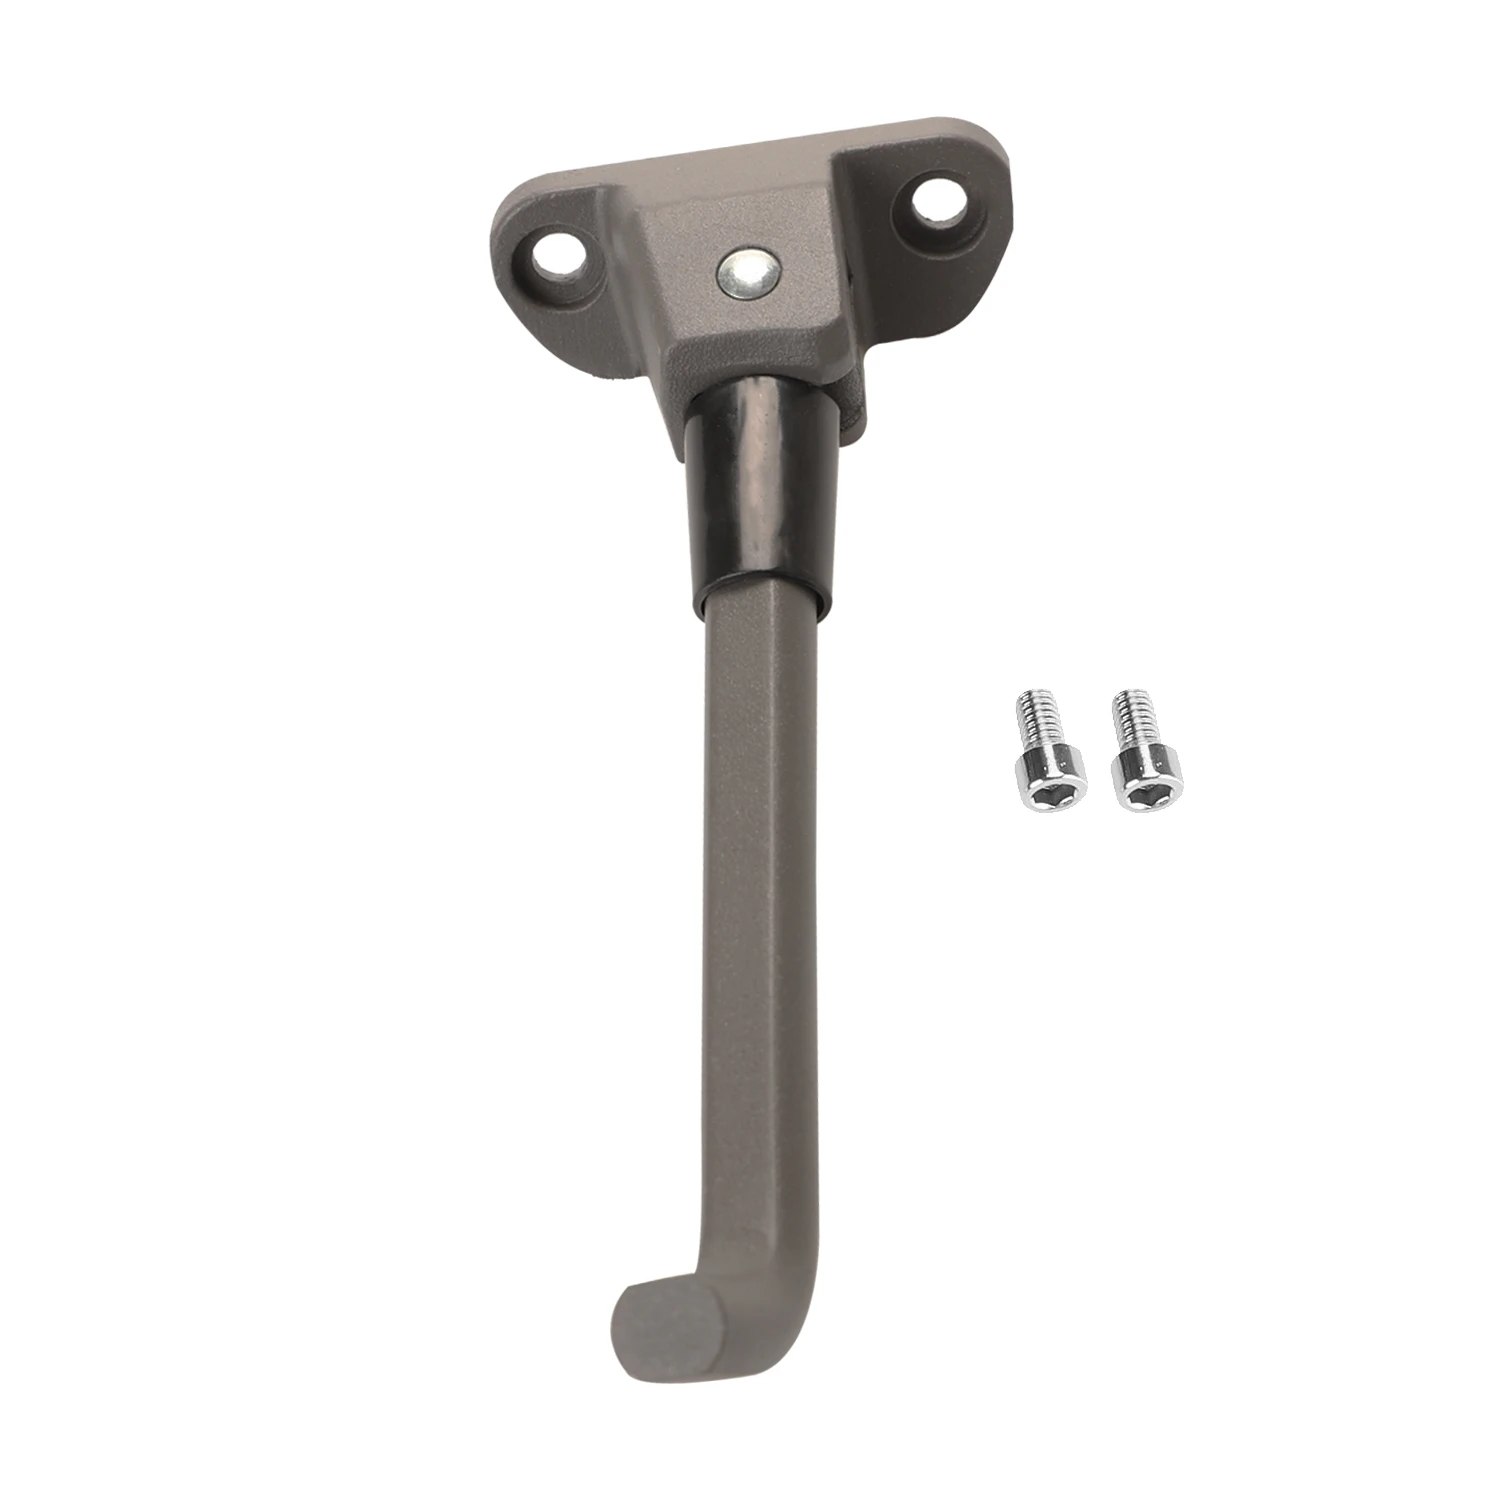 Extended Foot Support with Screws Suitable for G30Max Electric Scooter Aluminum Alloy Foot Support Frame with Screws Side Tripod